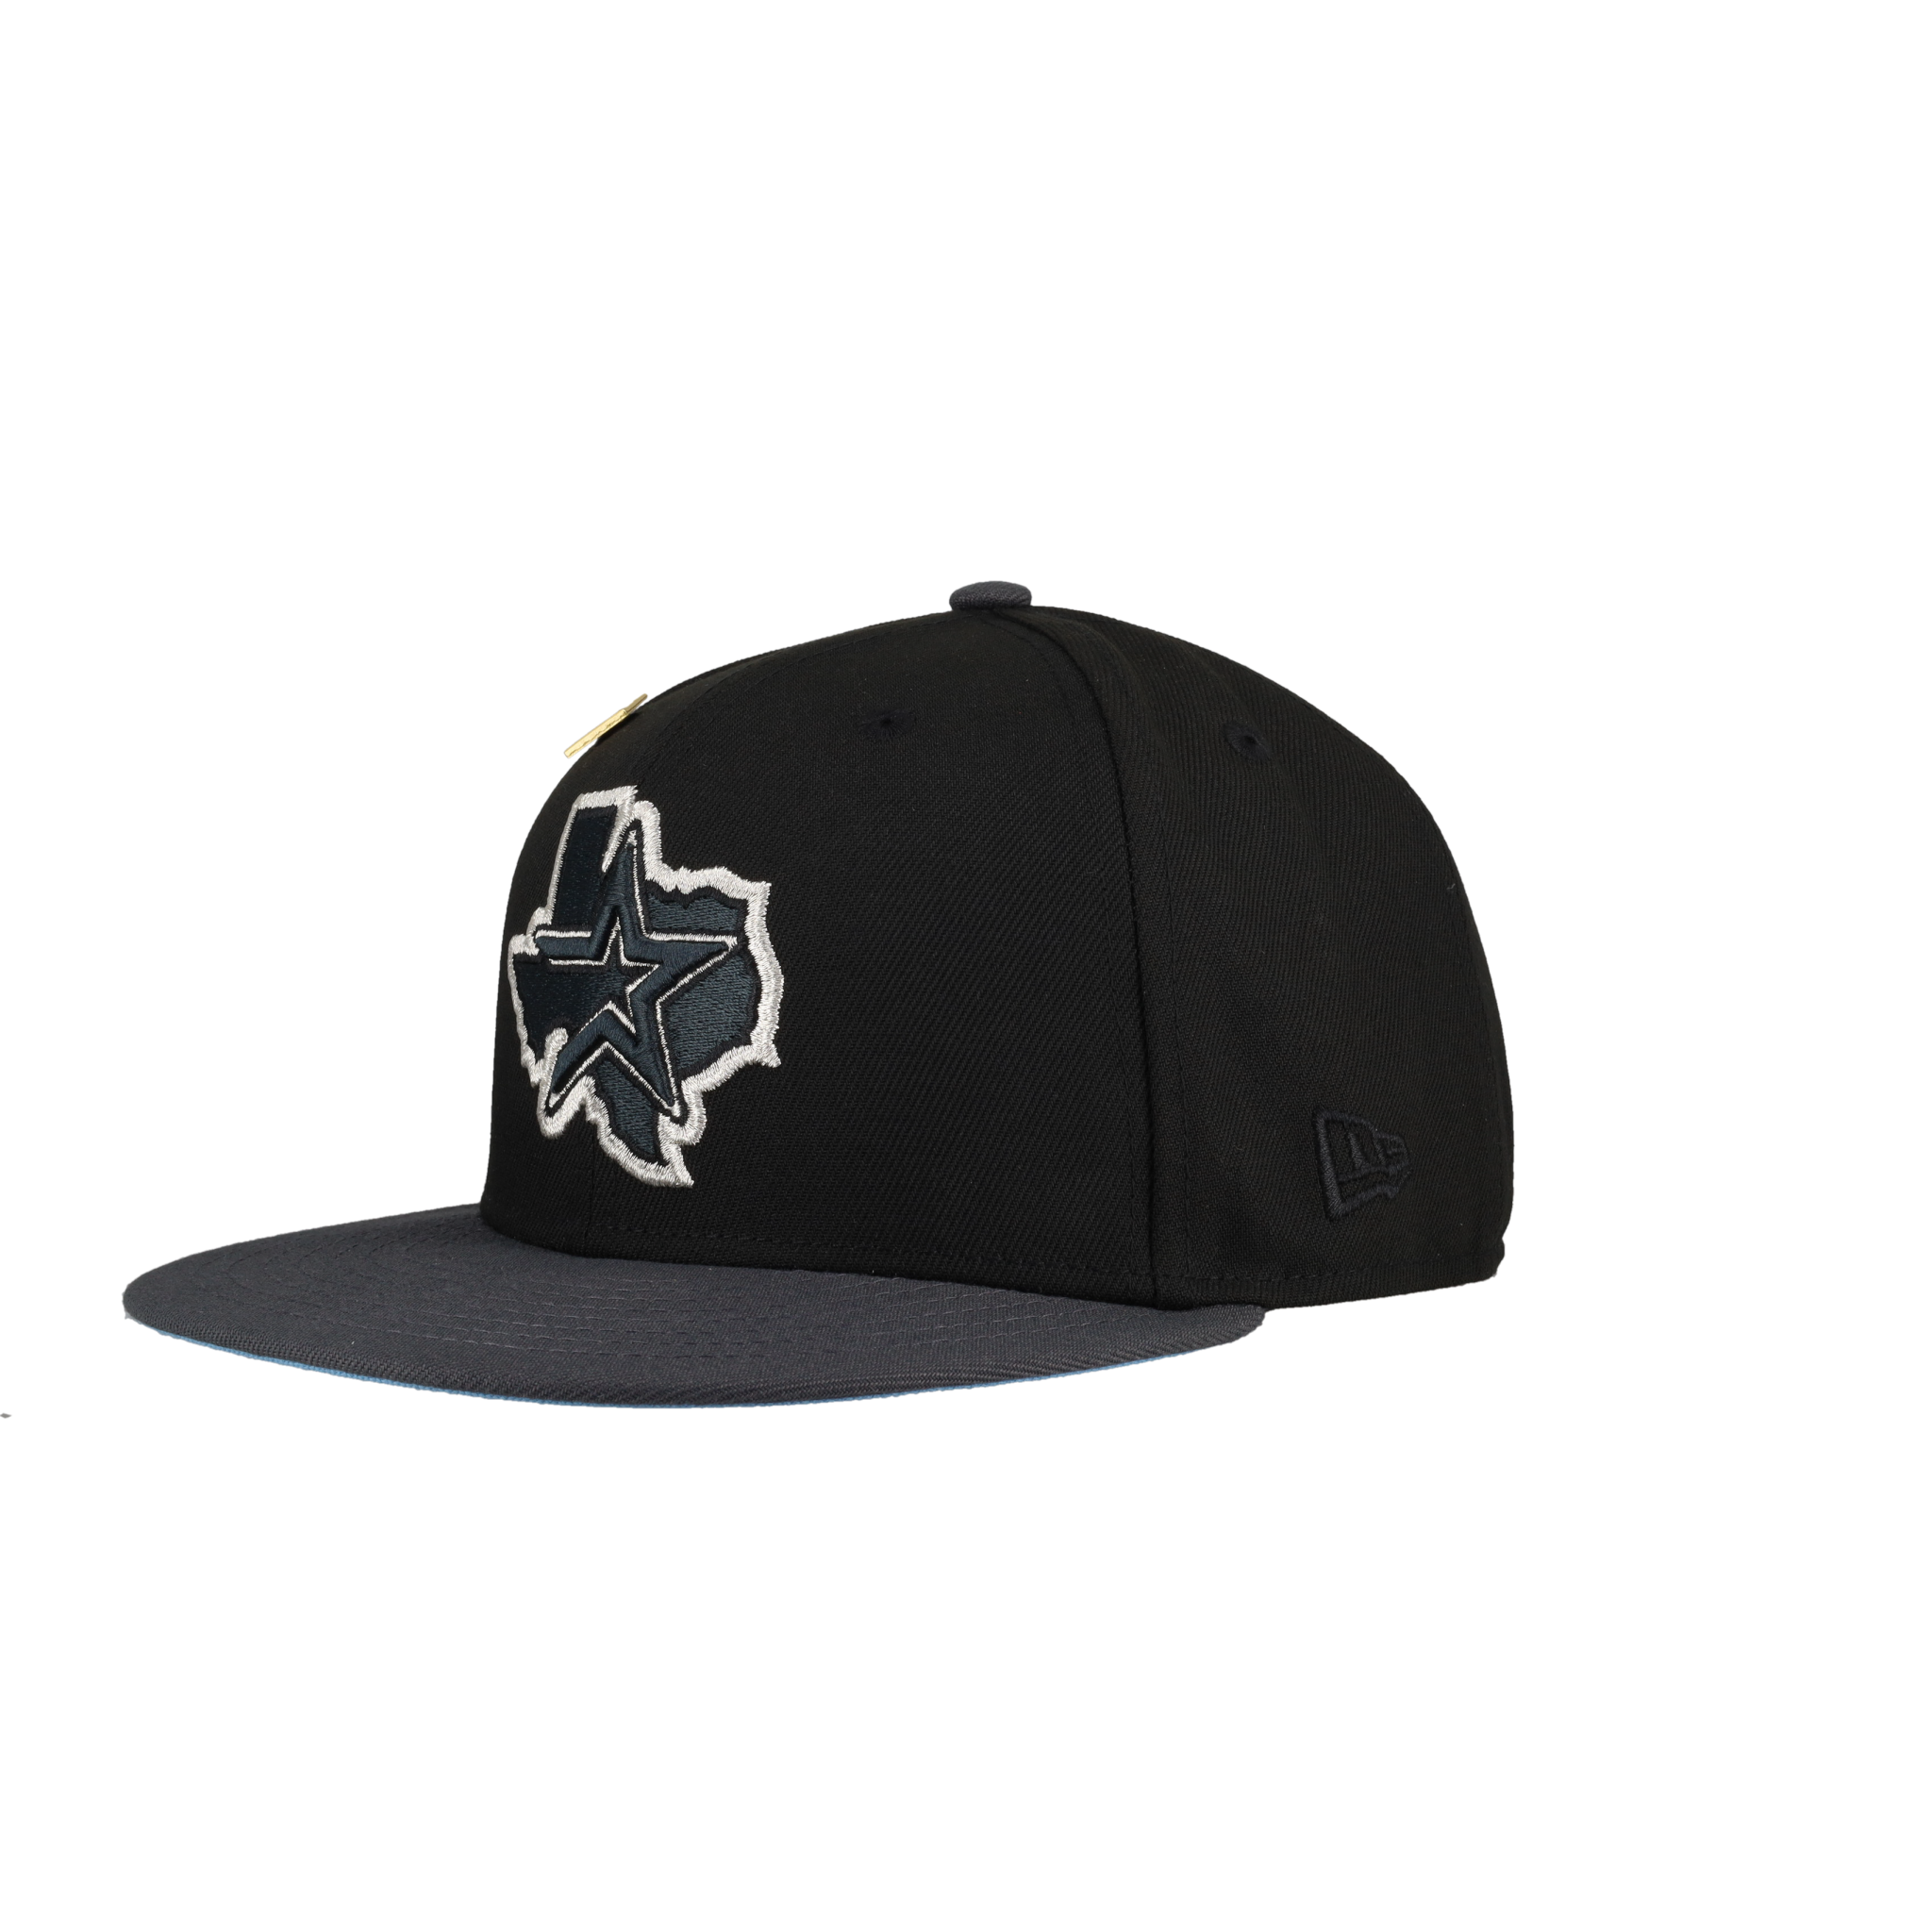 New Era 59Fifty Houston Astros 45th Anniversary Patch Concept Hat